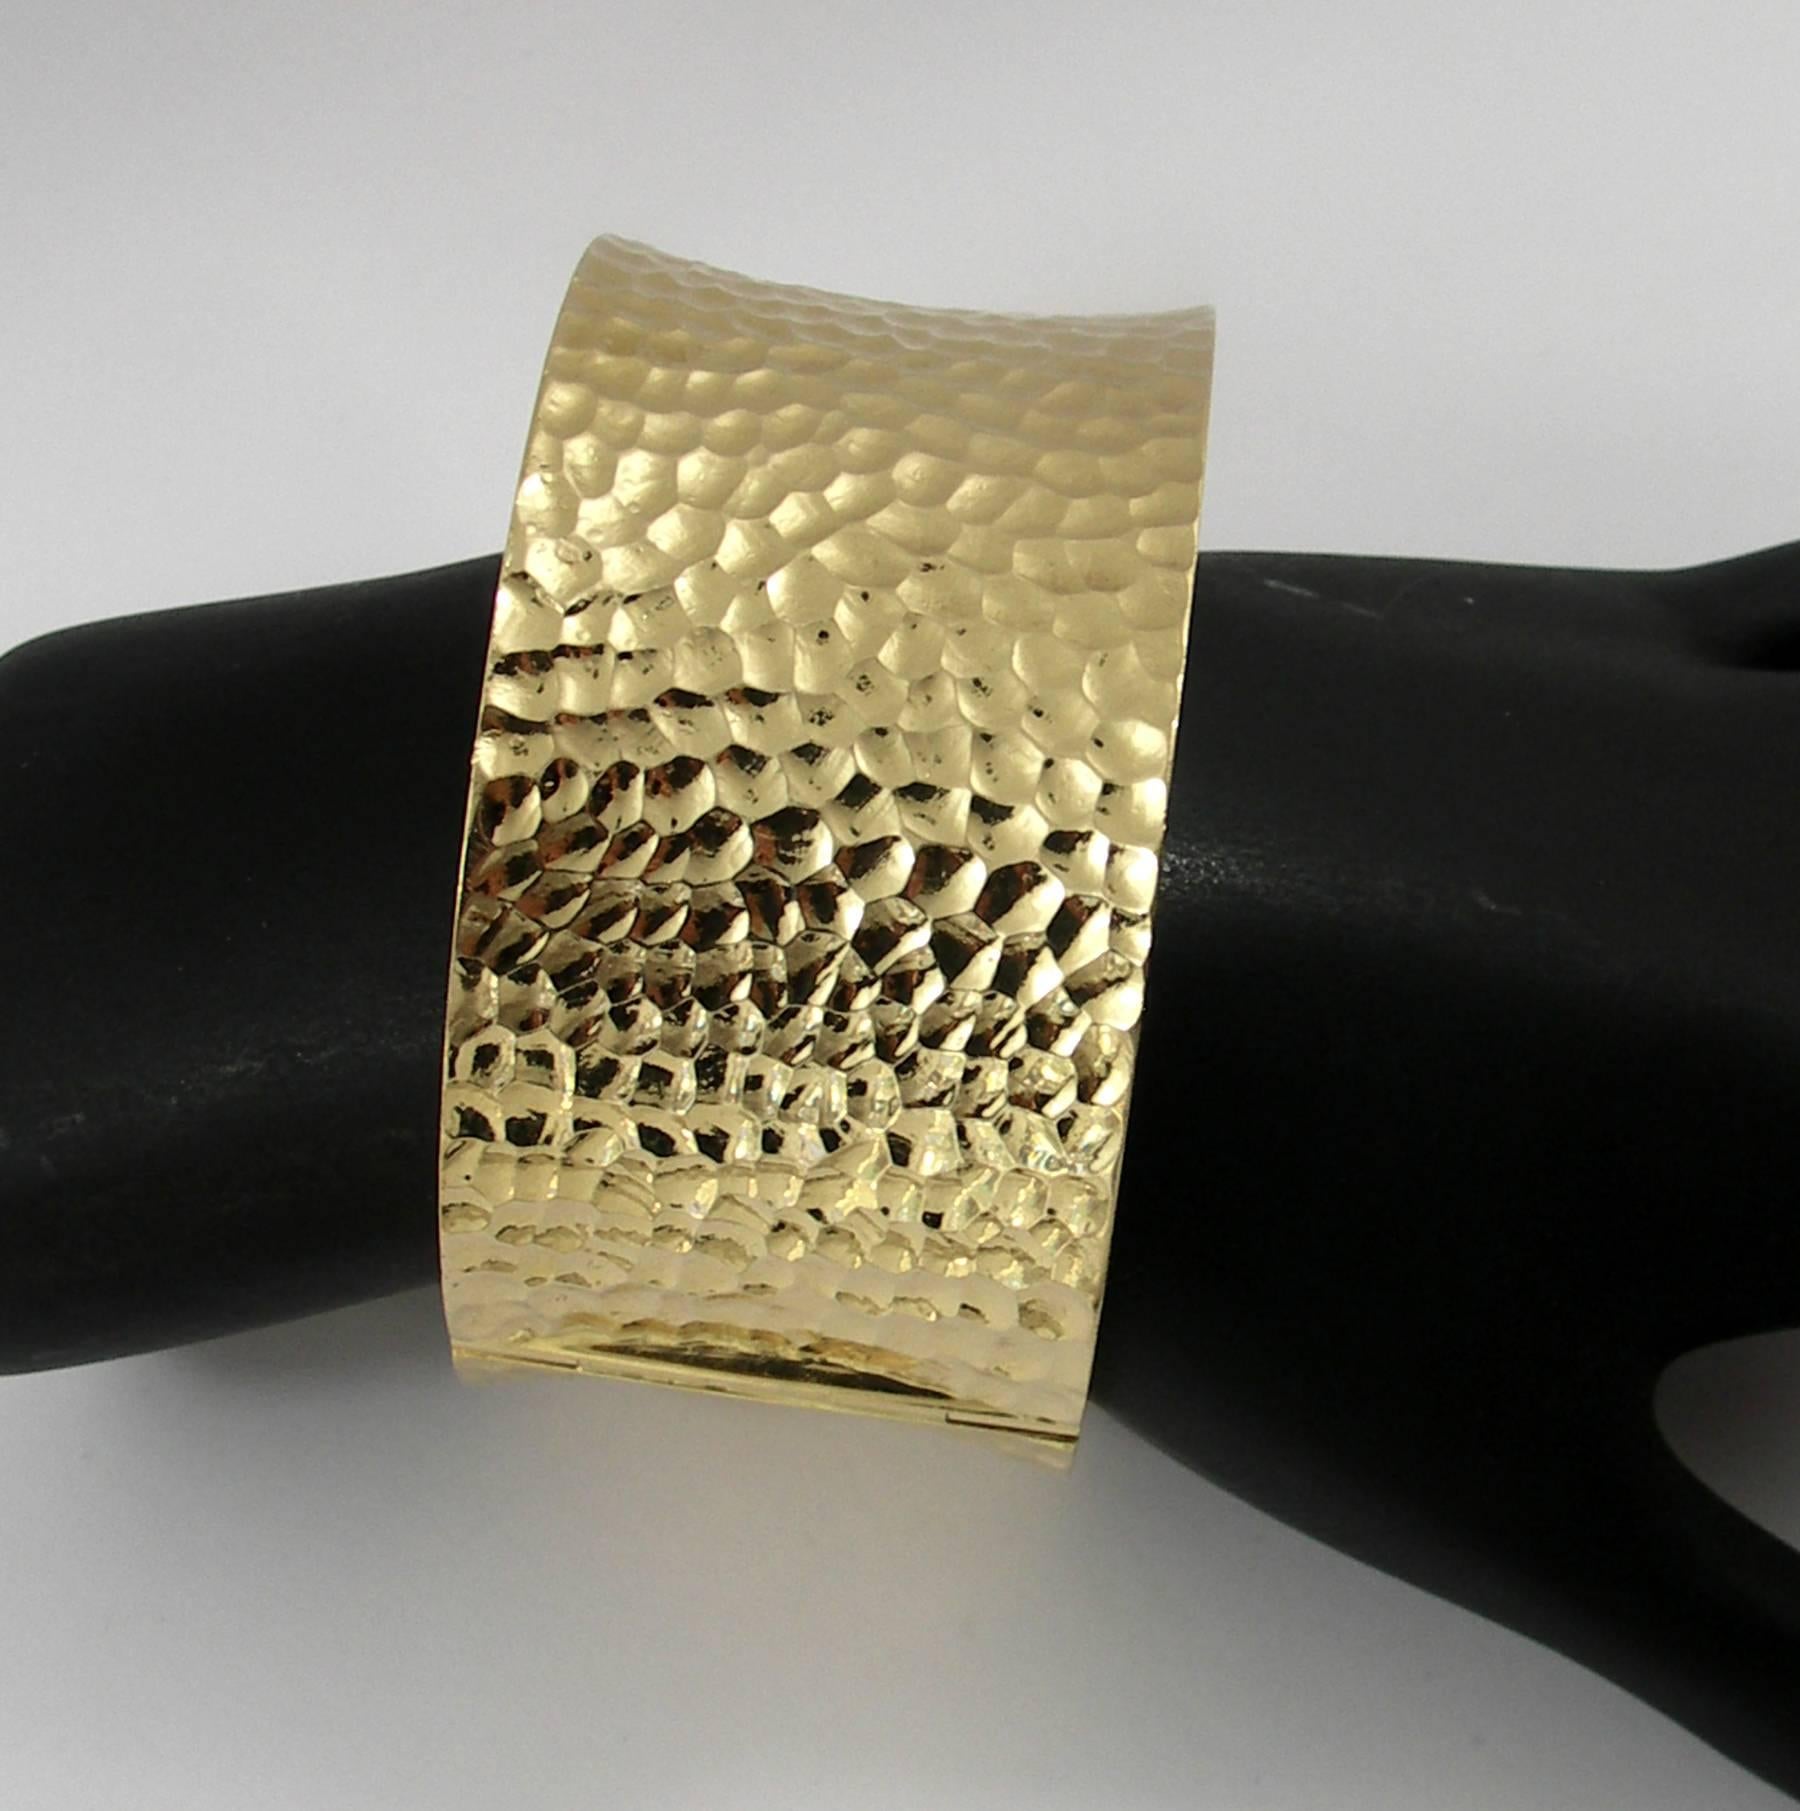 A 14K yellow gold bracelet, measuring 1 1/2 inches wide, and featuring a deep hammered finish. Bracelet is solidly built, with a hinge for easy access, and measures 7 inches in circumference.  Weight 107 grams.